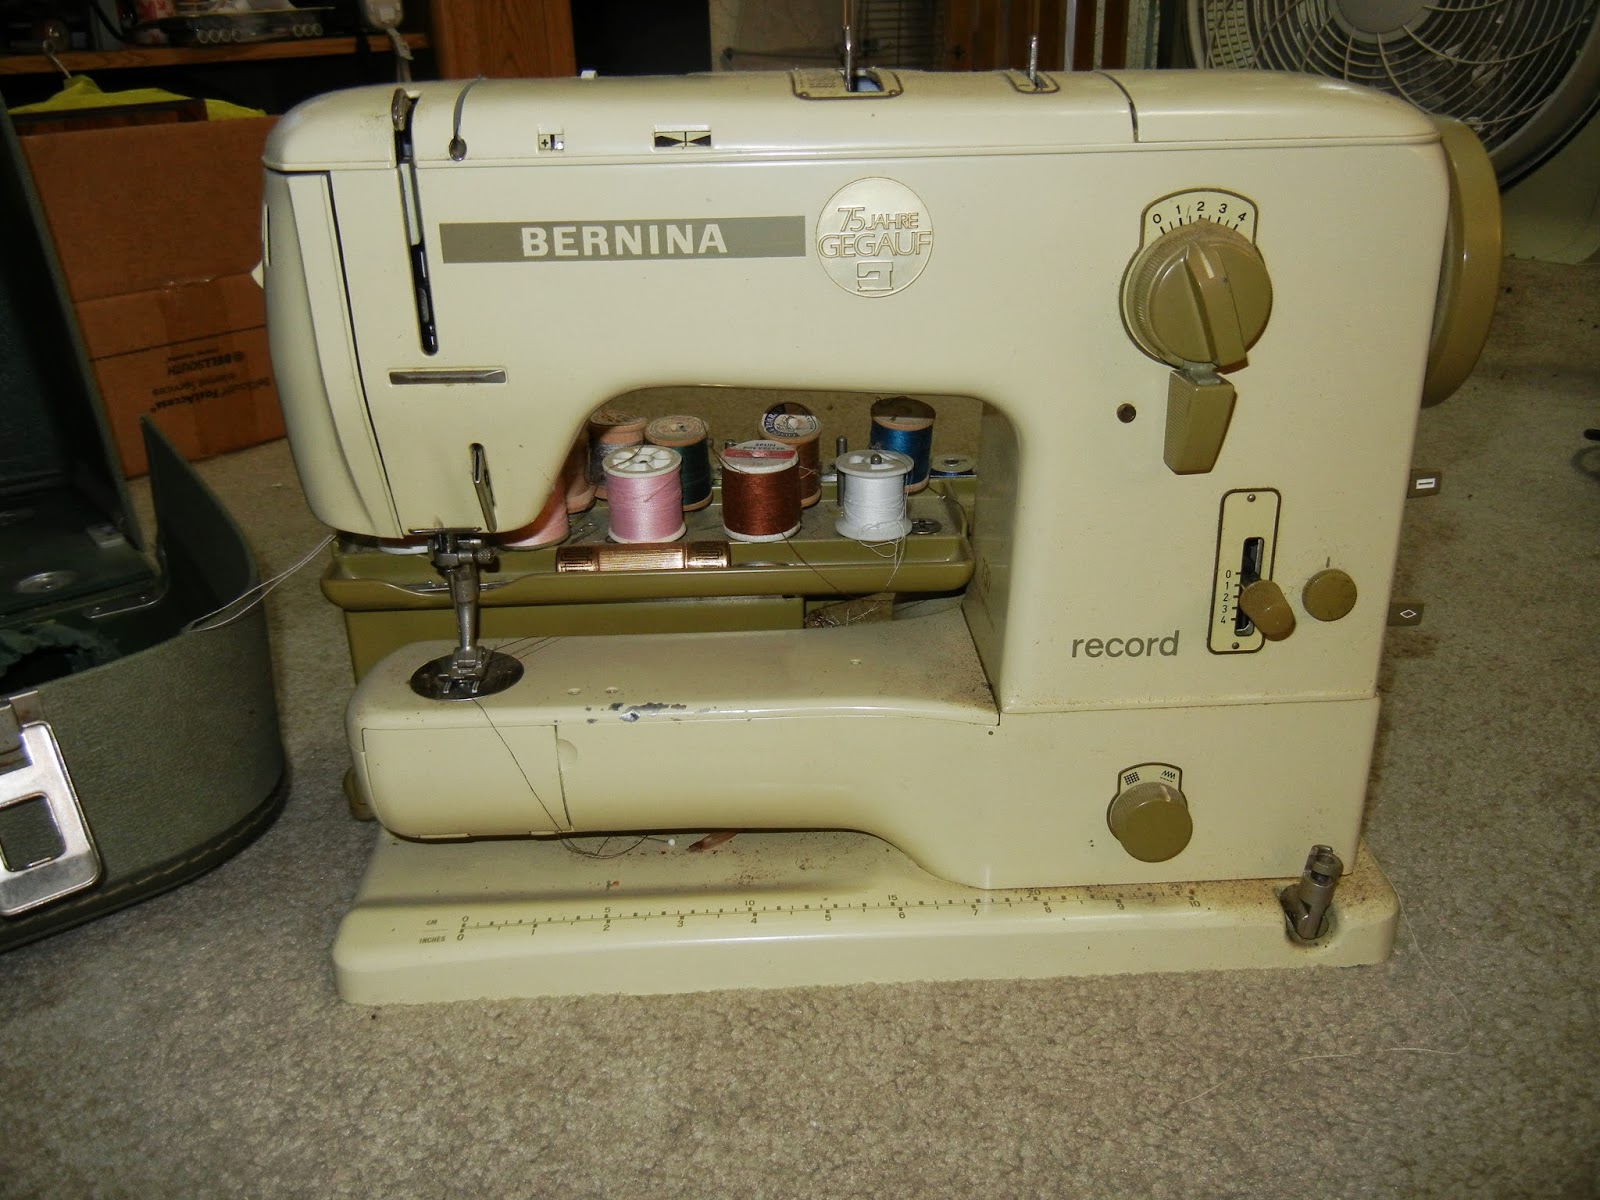 Ruby's Hot Box: Going Foreign, or How a Swiss-Made Bernina Joined Our Home